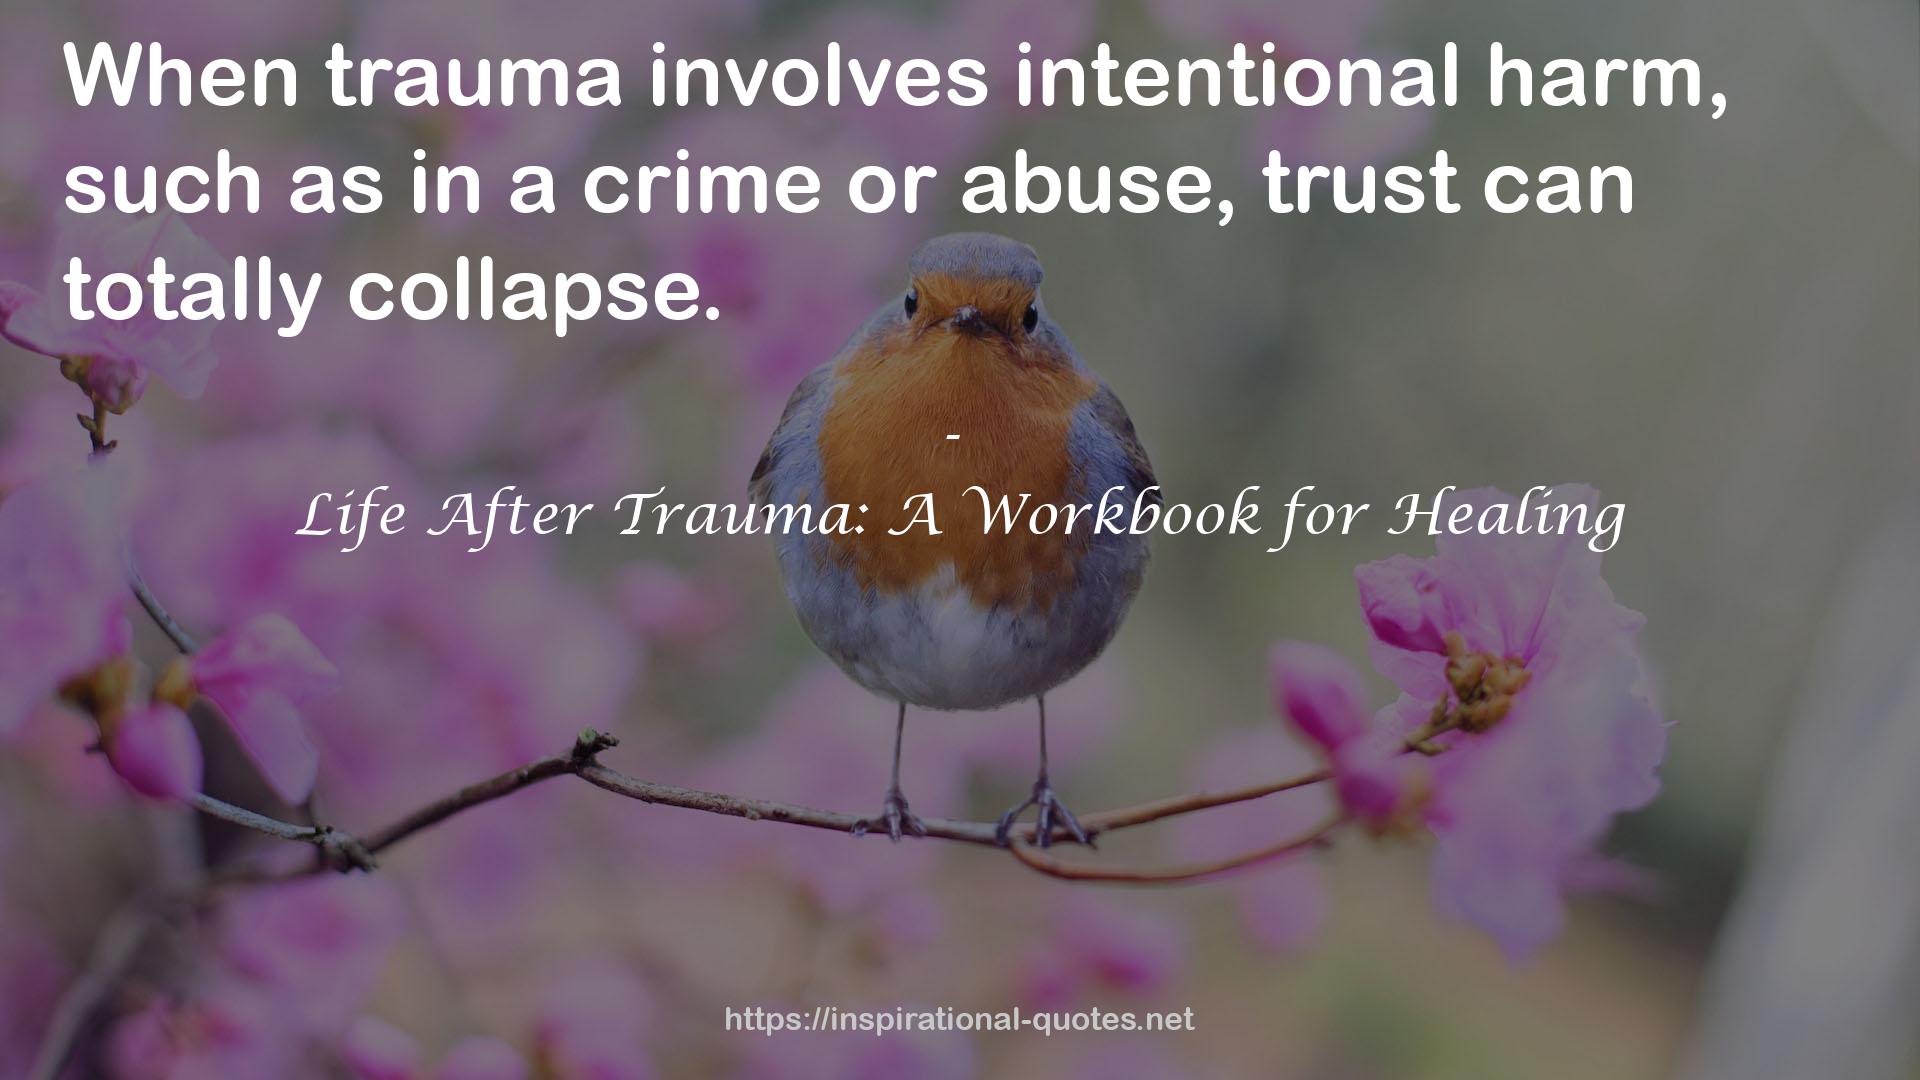 Life After Trauma: A Workbook for Healing QUOTES